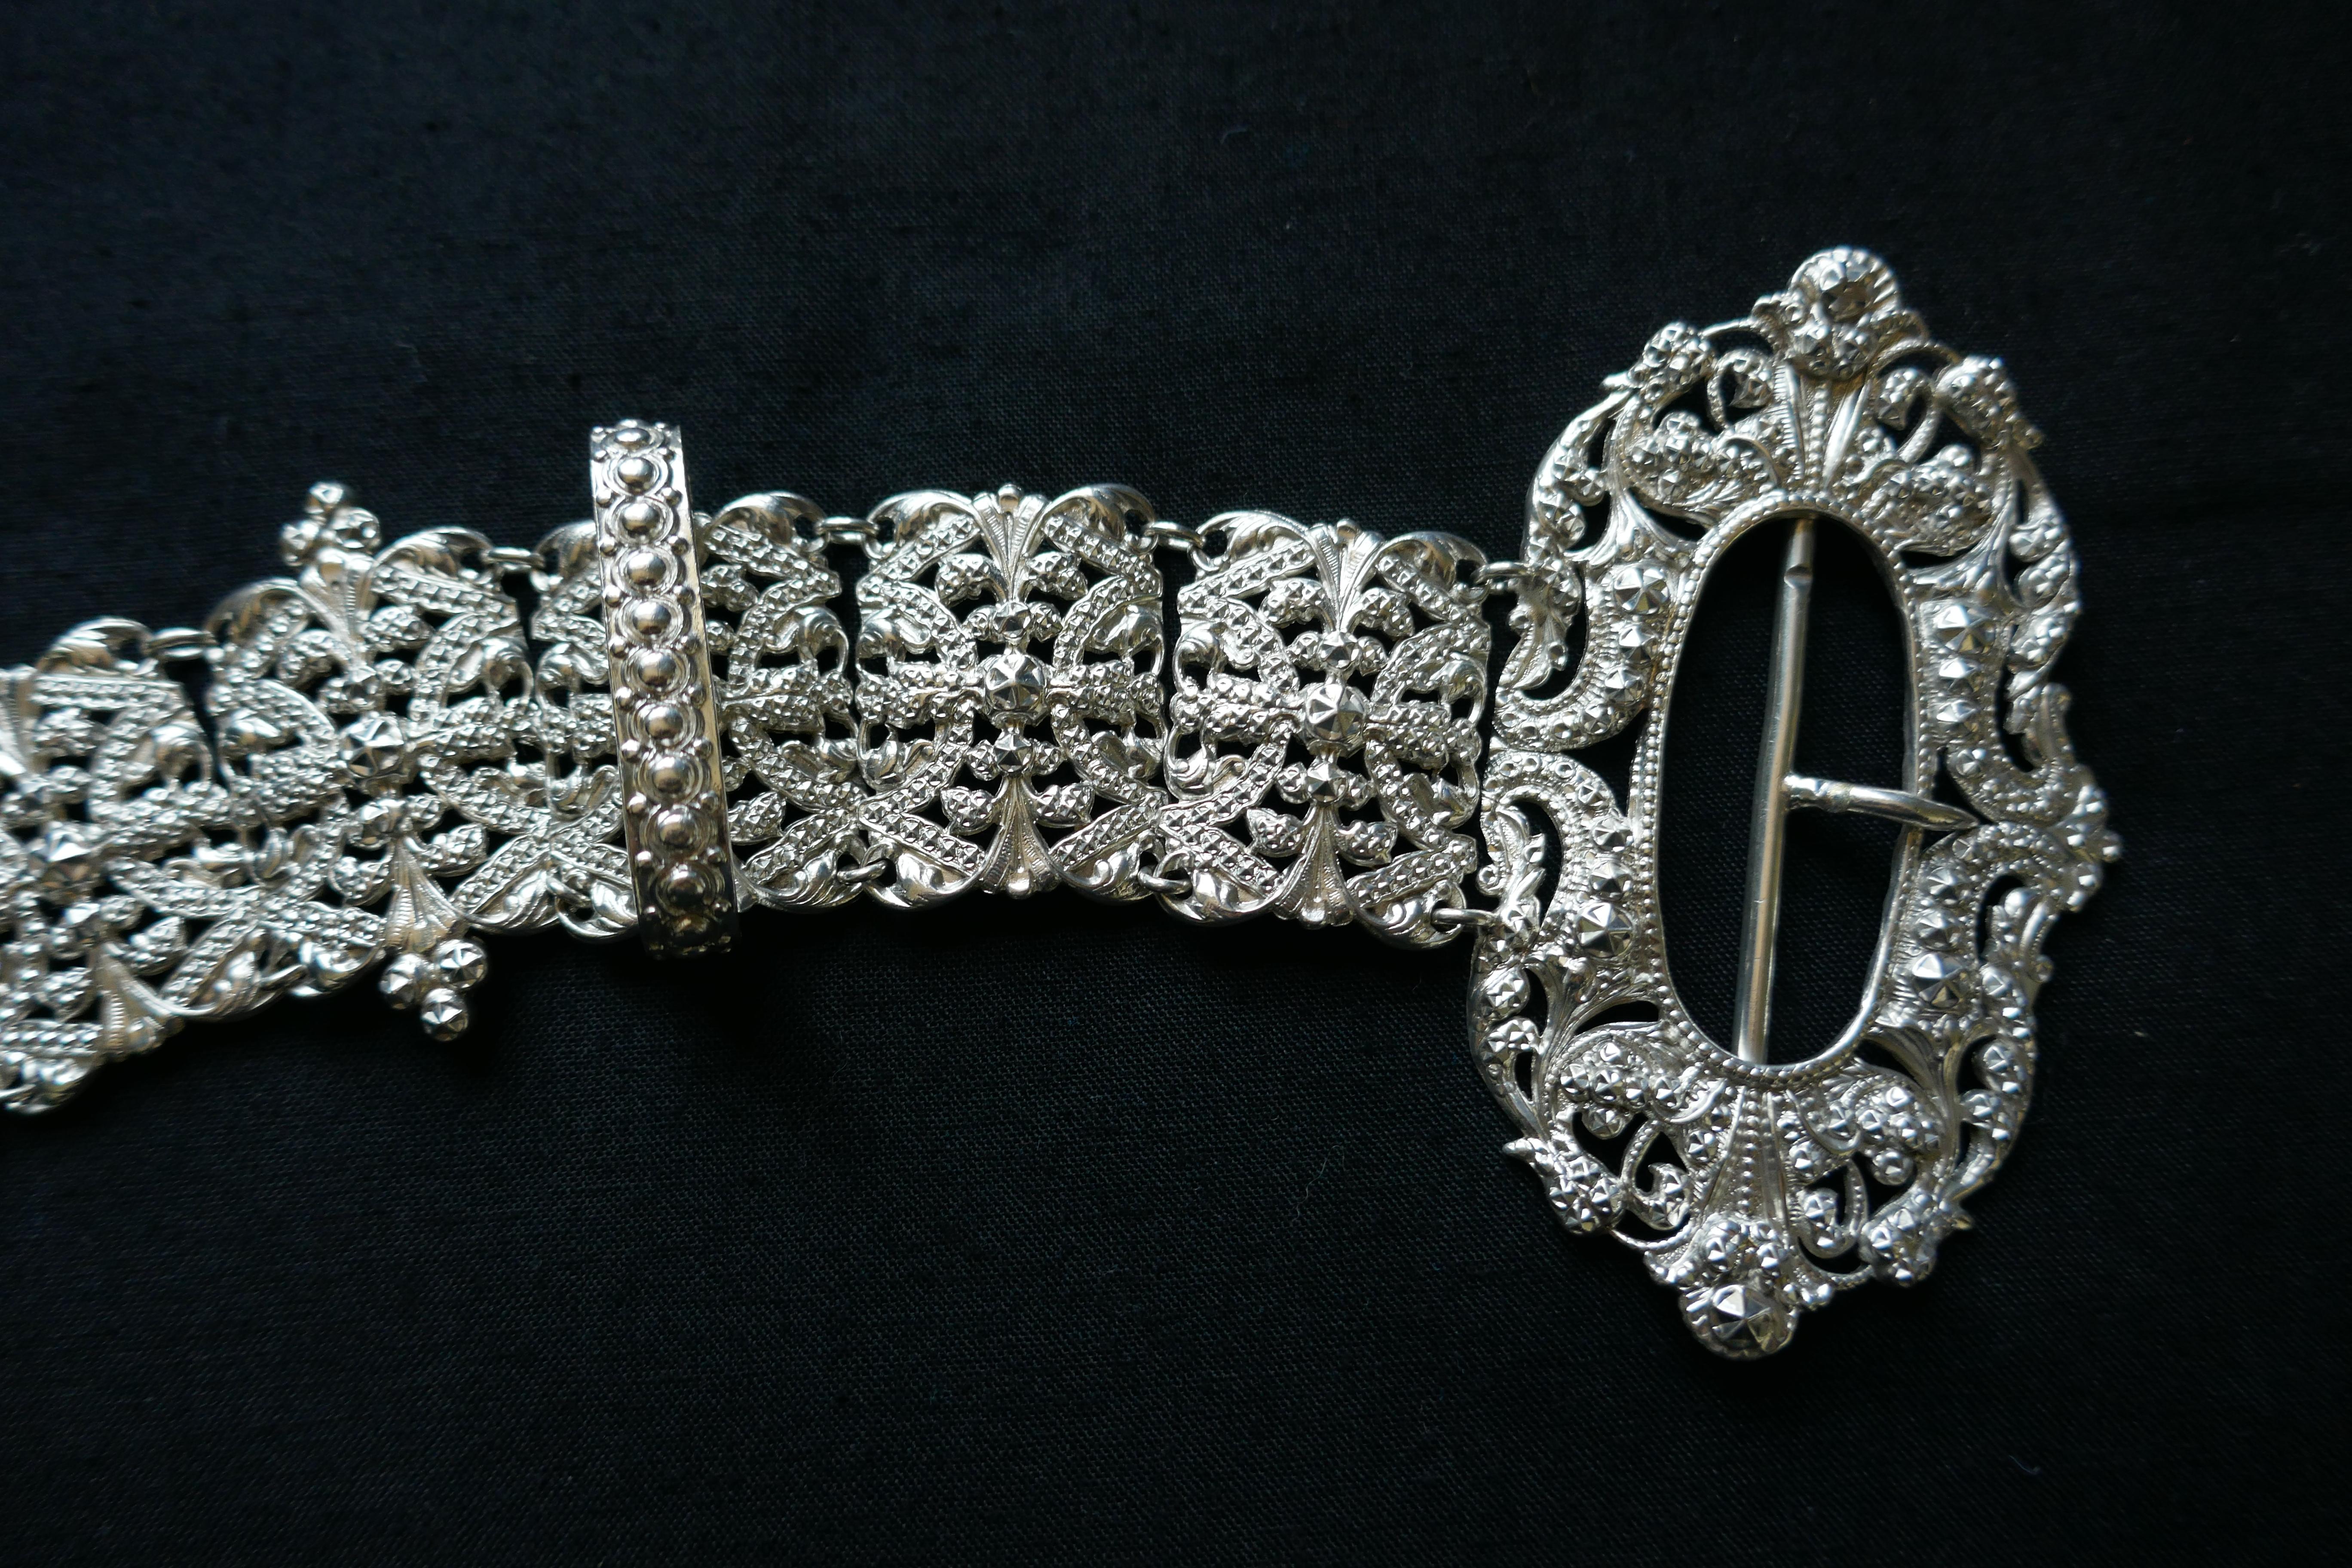 French Arts and Crafts Silver Belt, Articulated Links with Chatelaine Ring For Sale 3